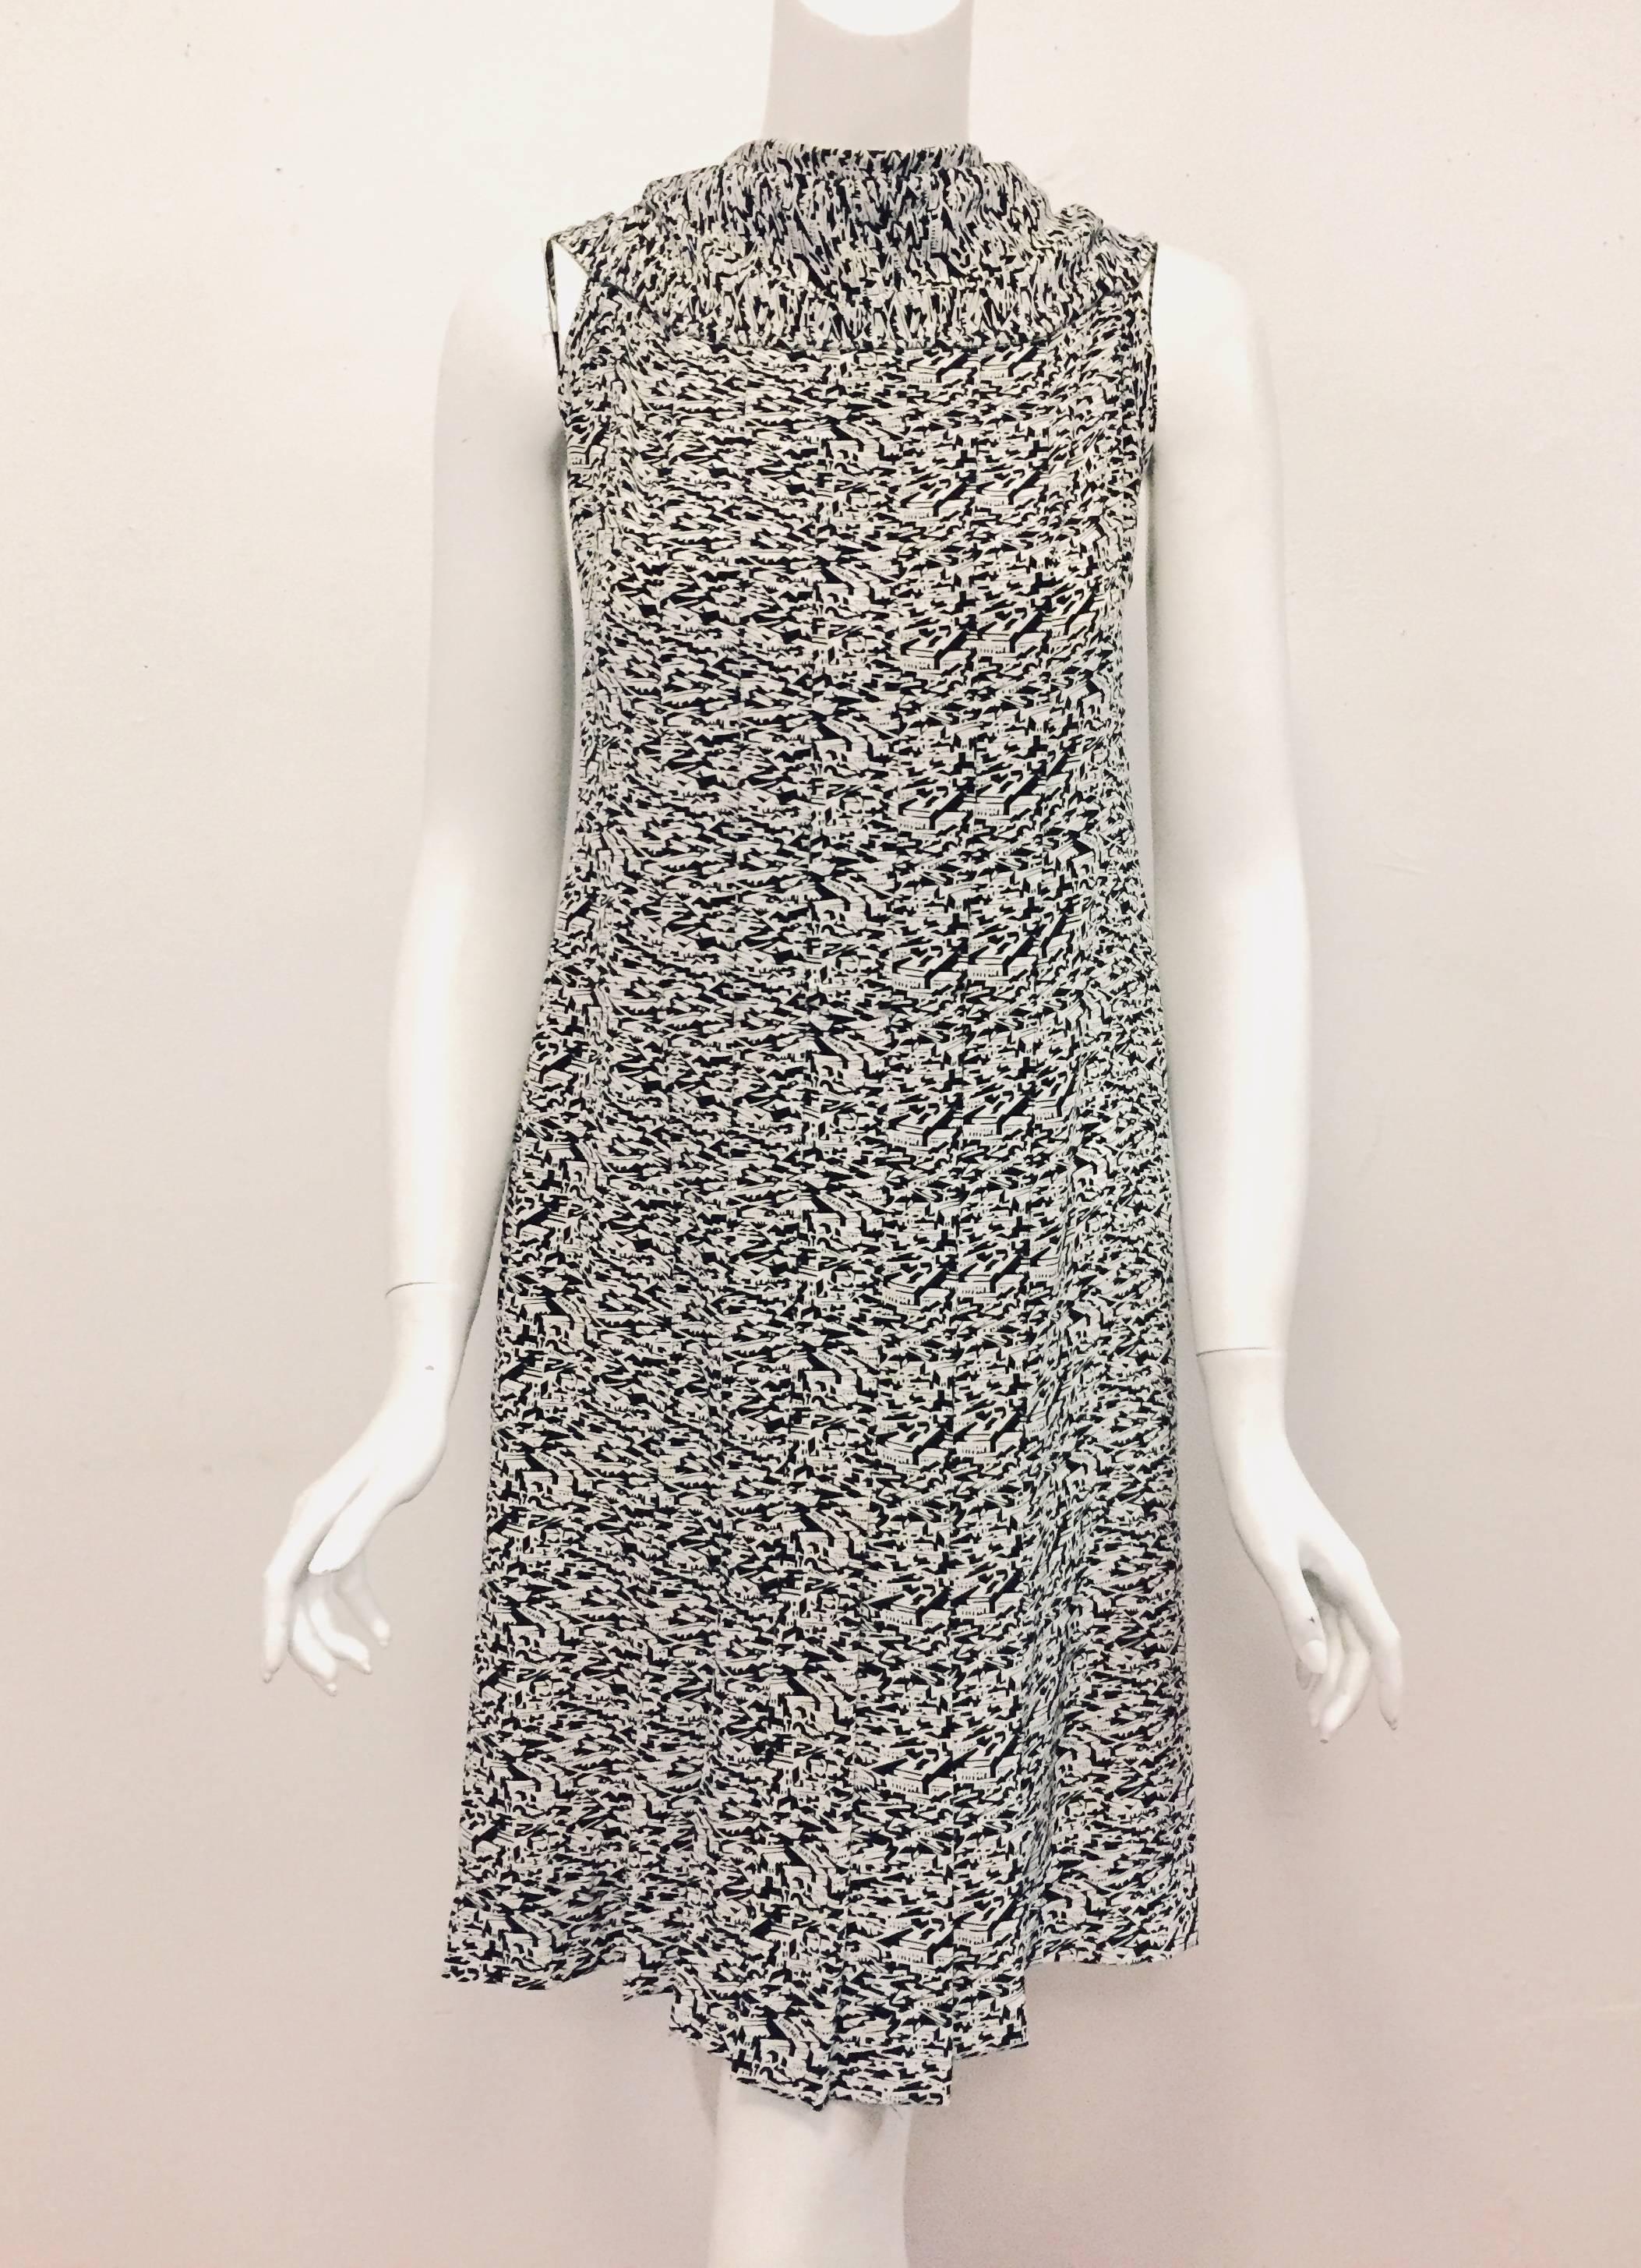 City Chanel Black and White City Print Silk Dress with Diverse Usage Scarf 1